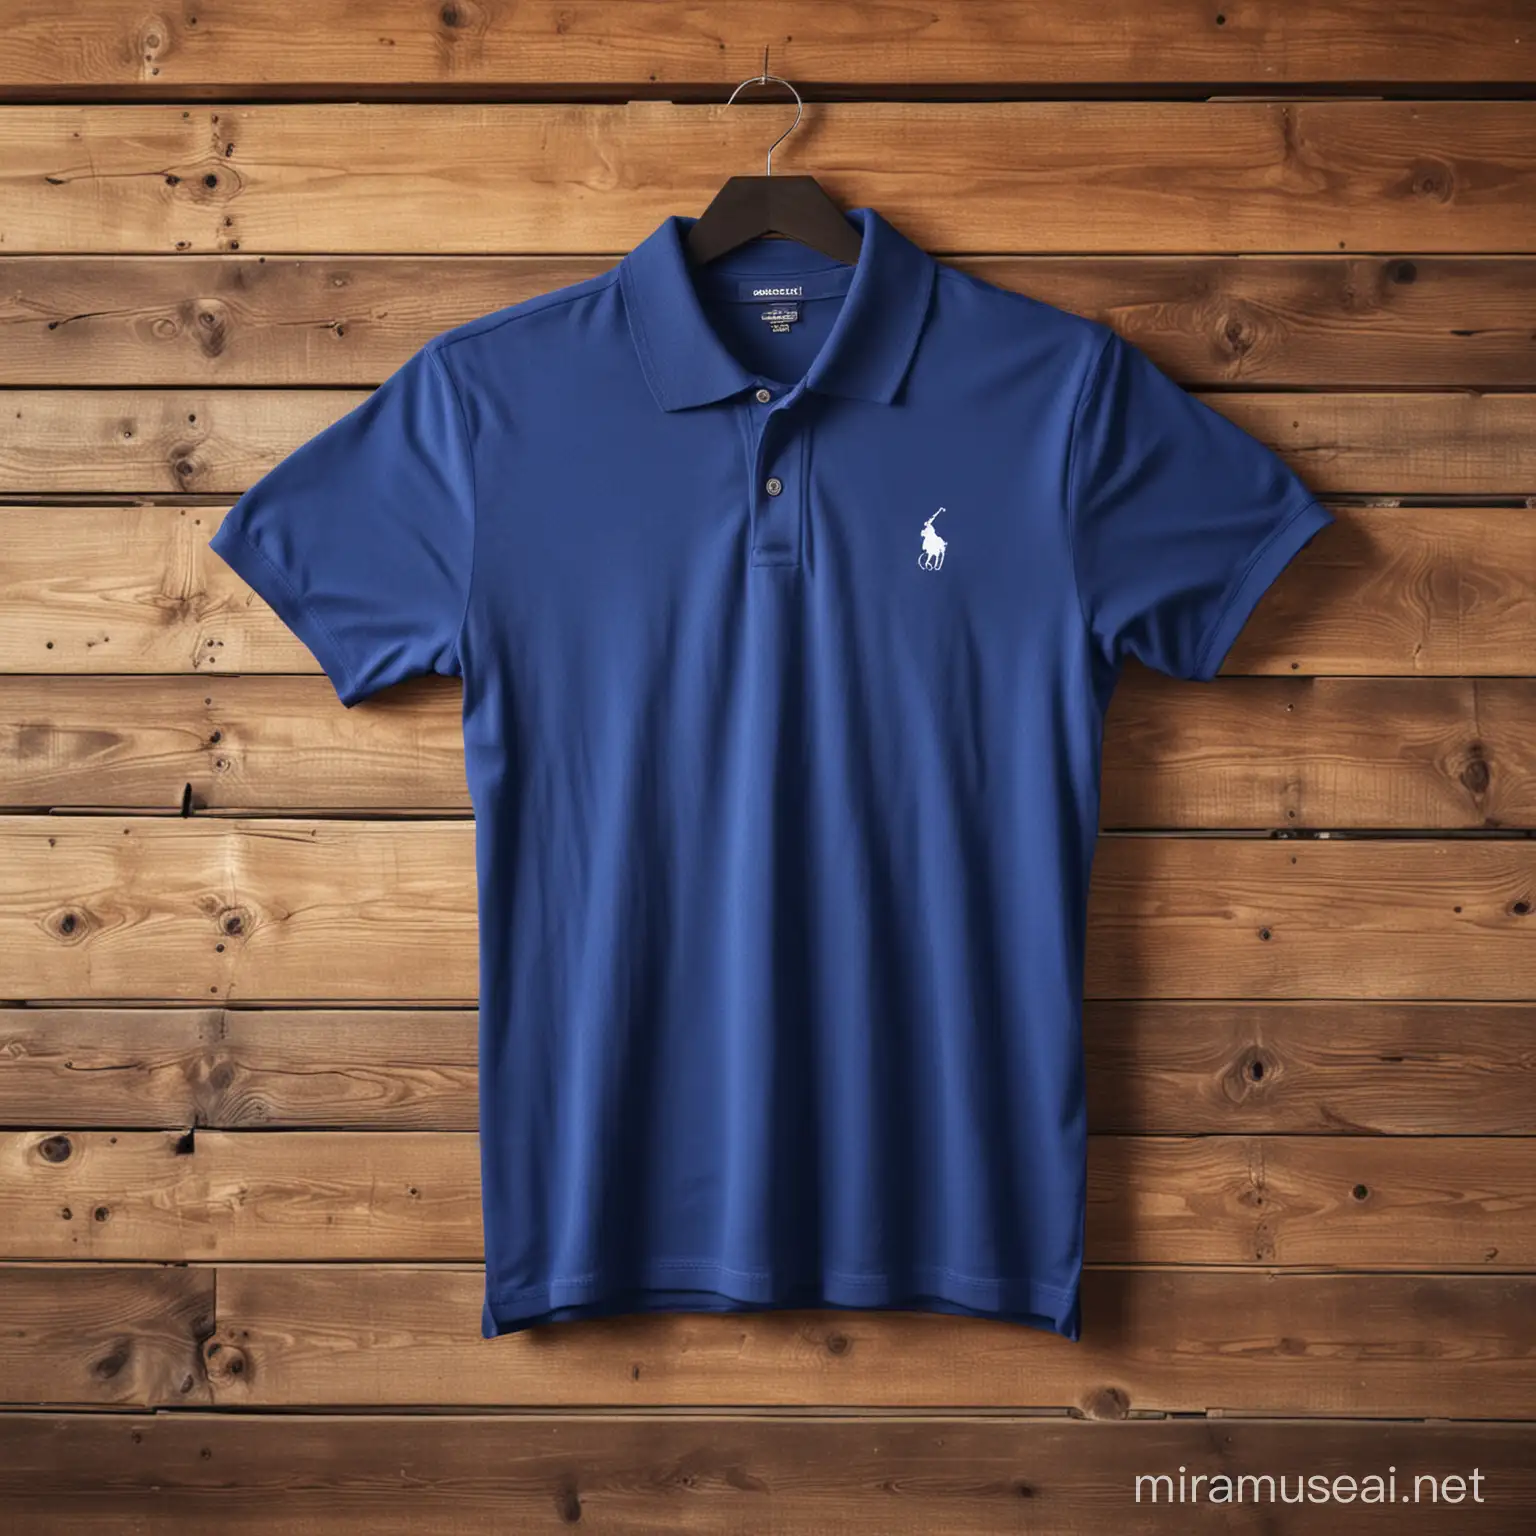 royal blue polo t shirt hanging on wooden wall with nail